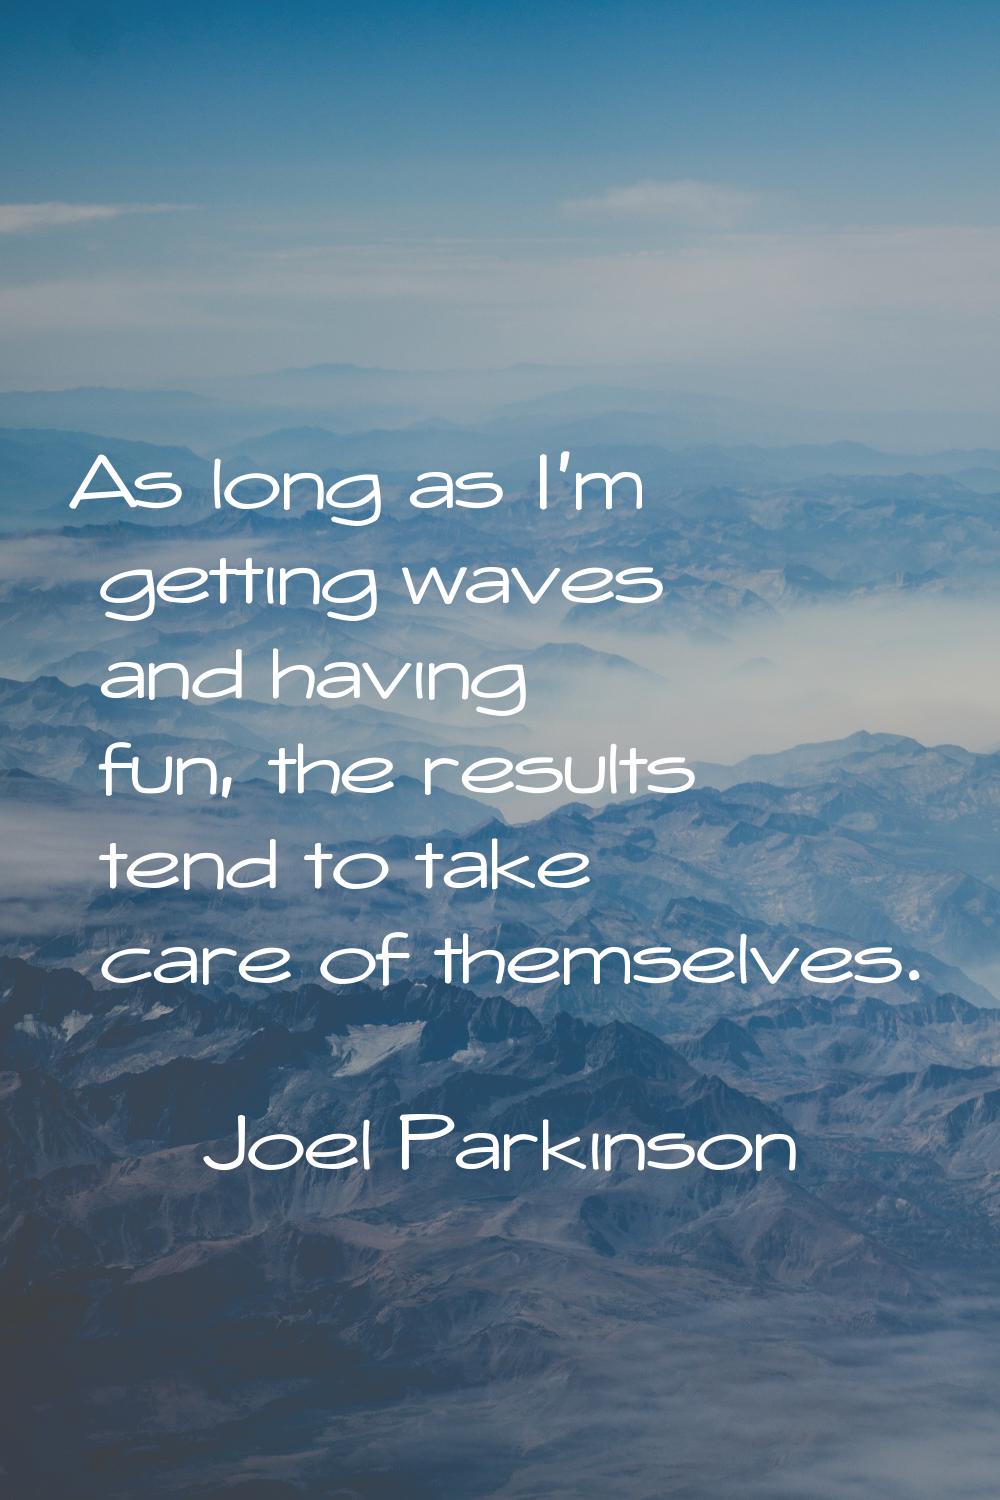 As long as I'm getting waves and having fun, the results tend to take care of themselves.